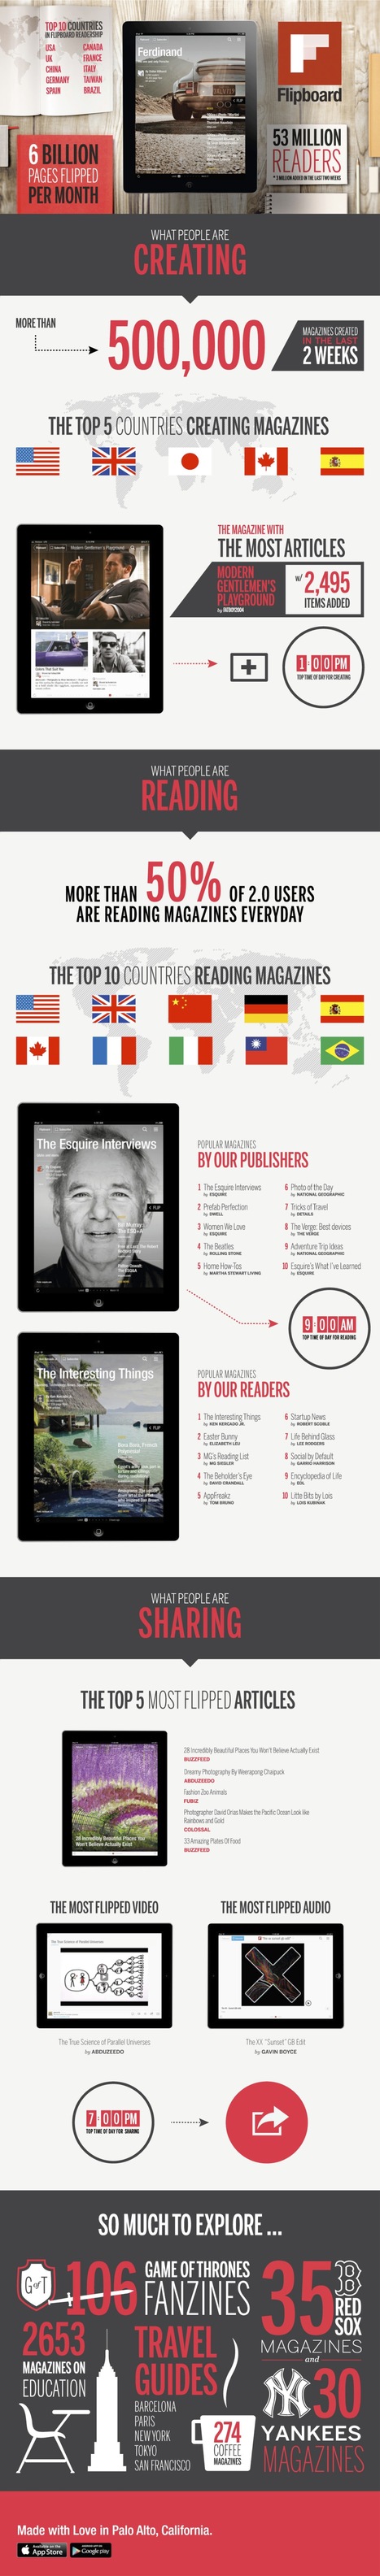 The State of Flipboard and Rise of Mobile Curation | Dashburst | Public Relations & Social Marketing Insight | Scoop.it